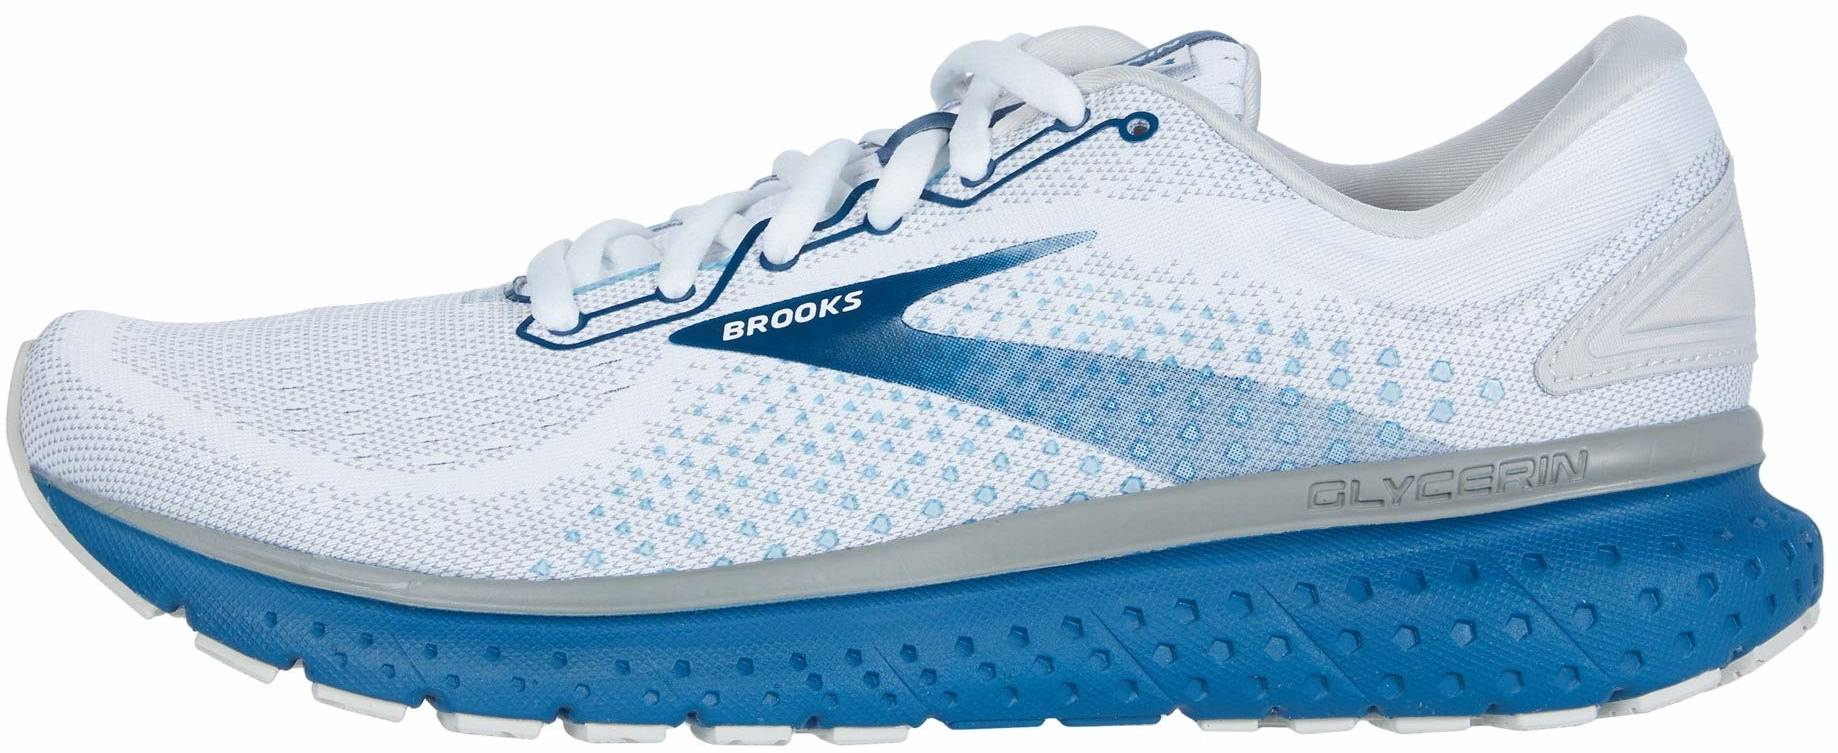 brooks glycerin running shoes